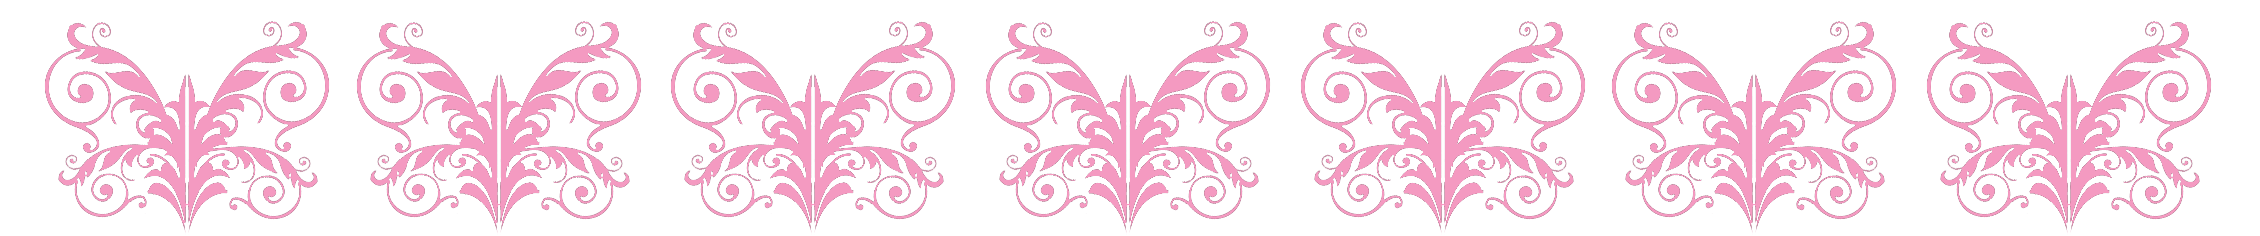 Butterfly border clipart.